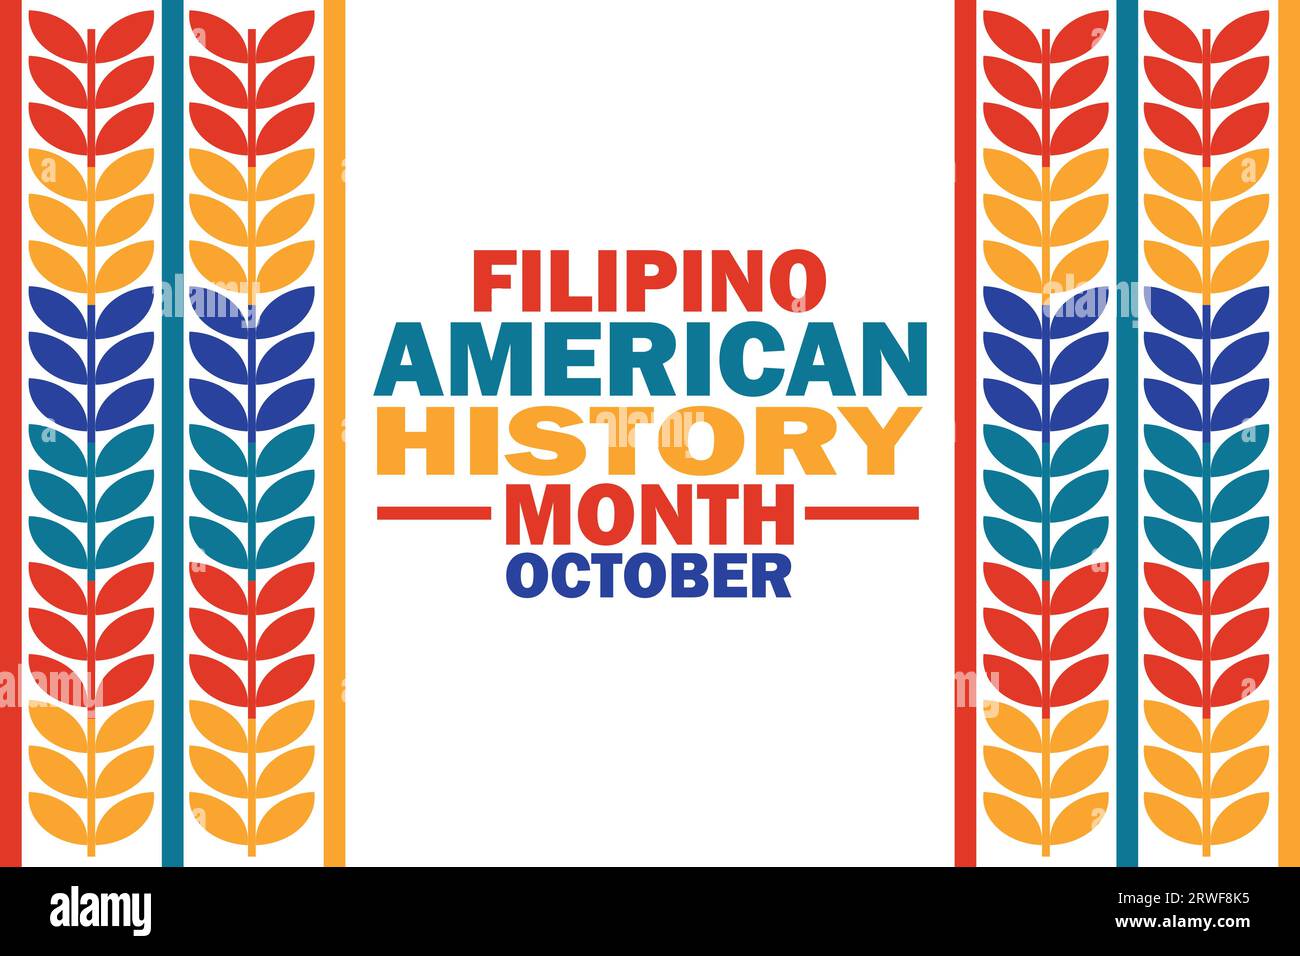 Filipino American History Month October Vector illustration. Holiday concept. Template for background, banner, card, poster with text inscription. Stock Vector